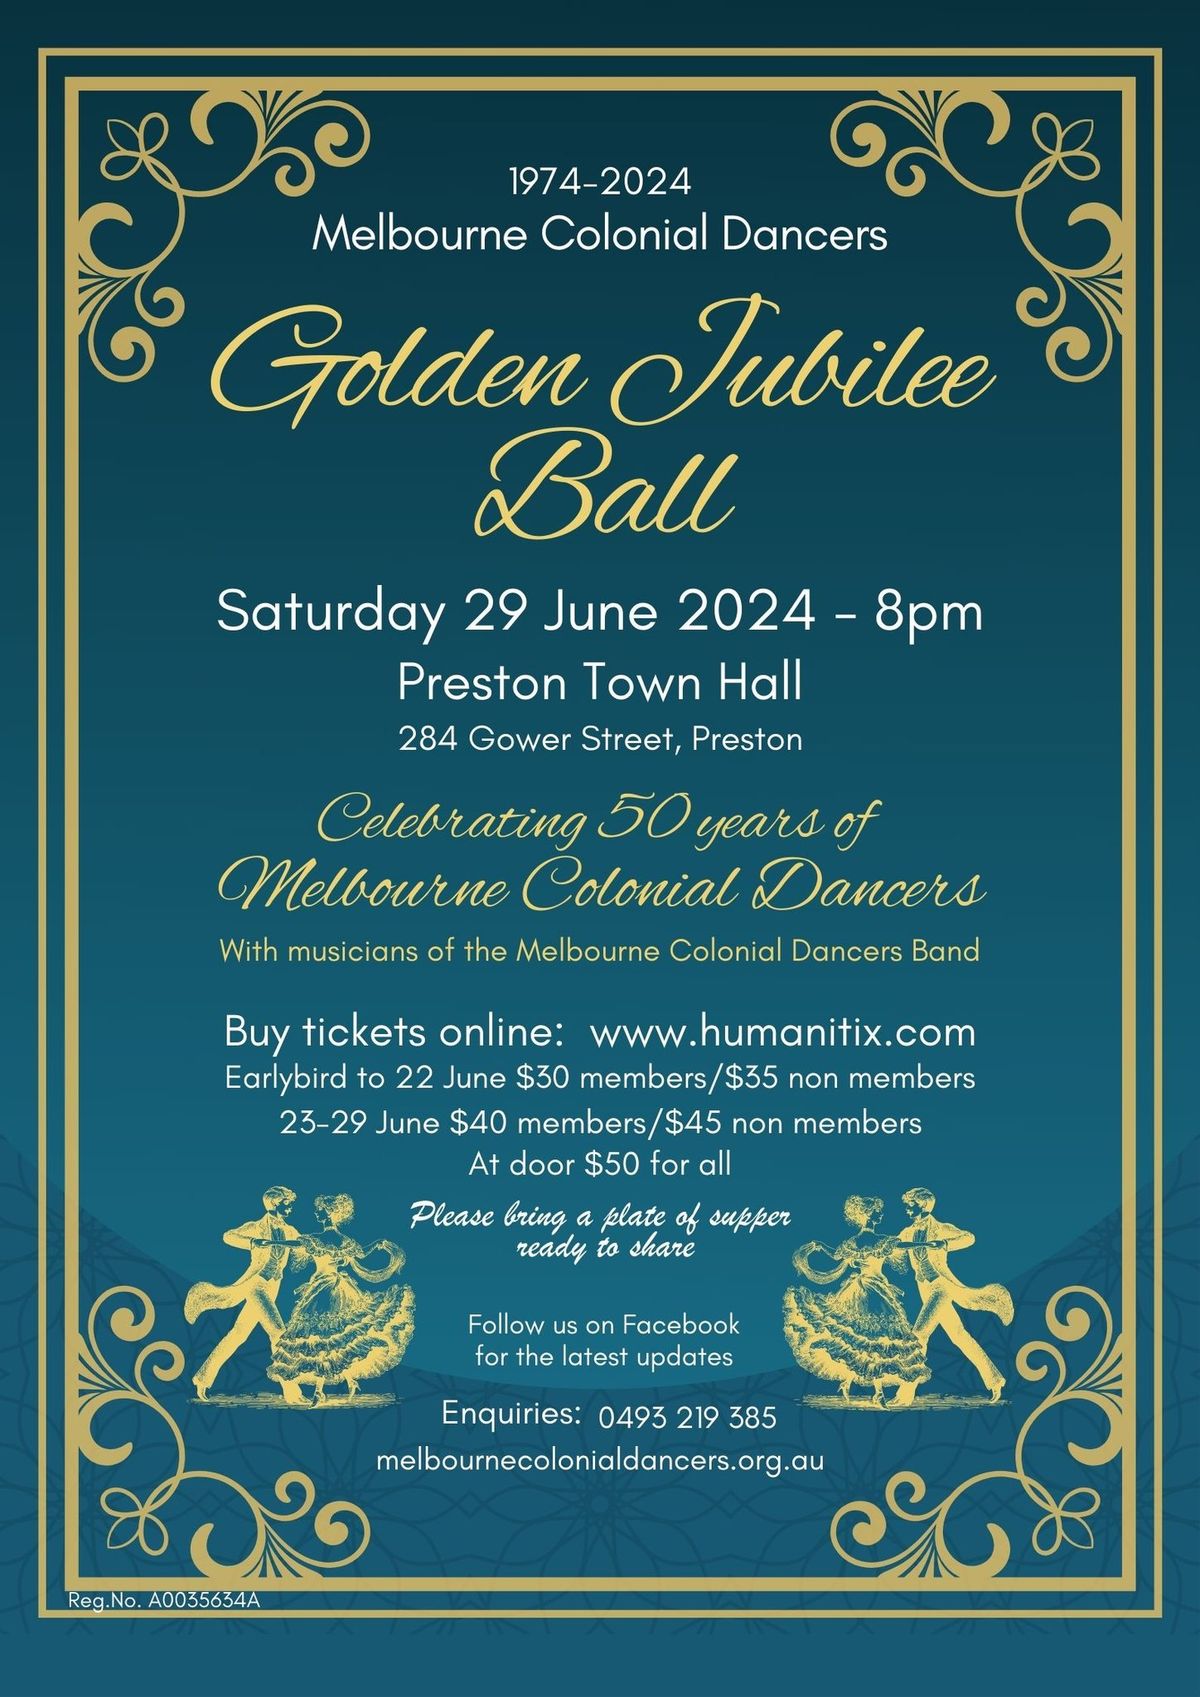 Golden Jubilee Ball - with Melbourne Colonial Dancers